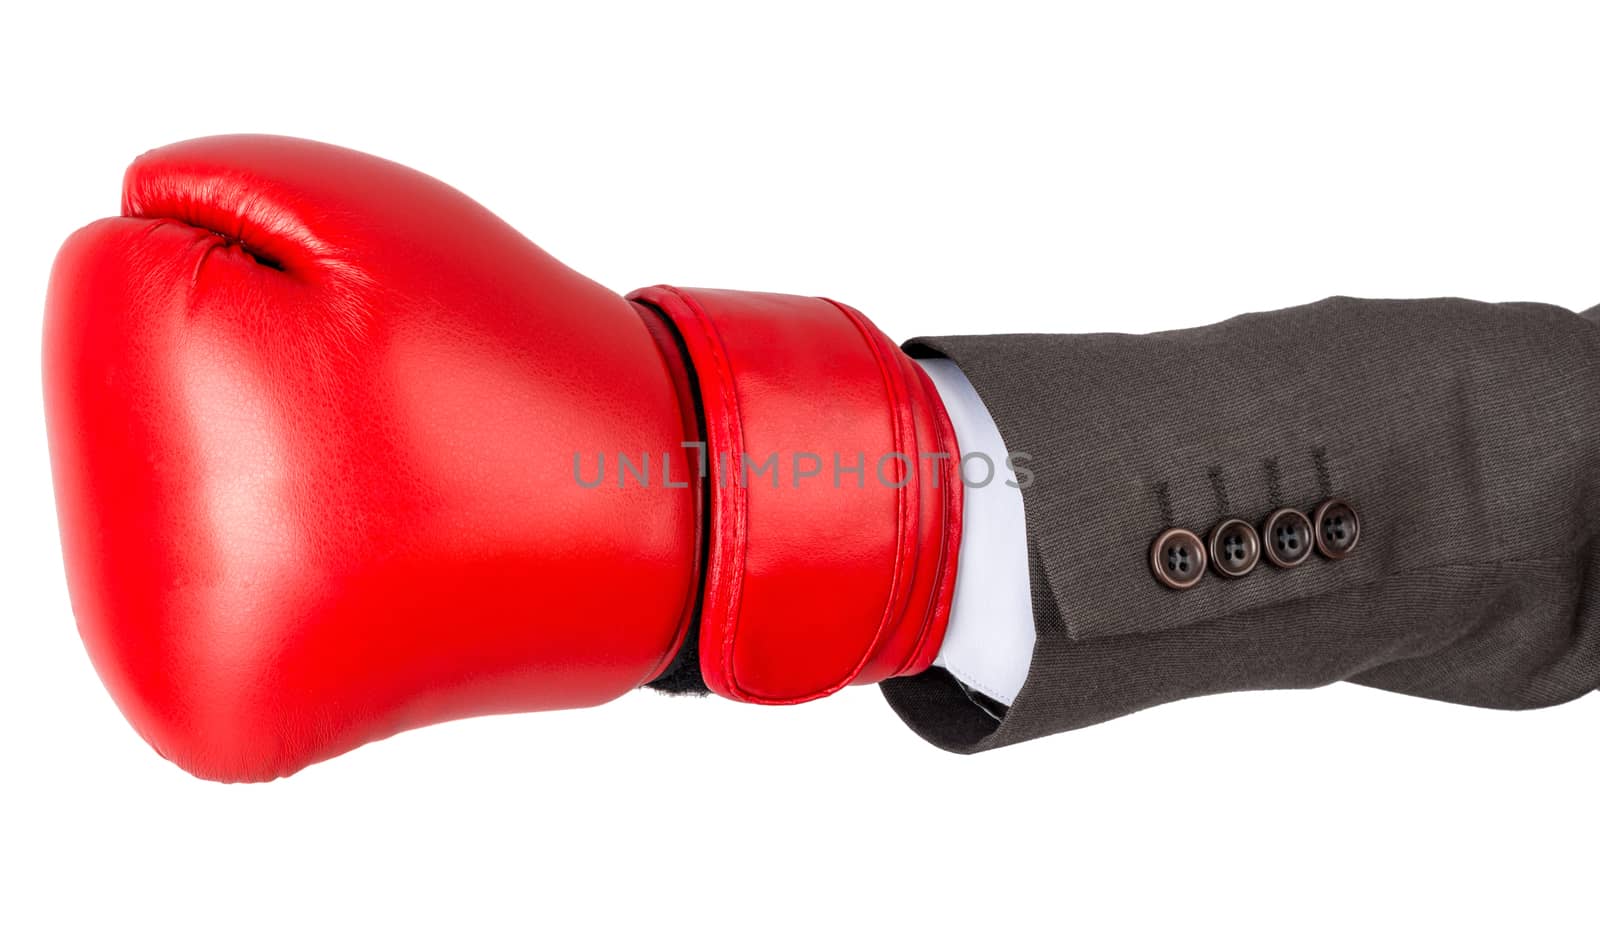 Hand with boxing glove isolated on white background